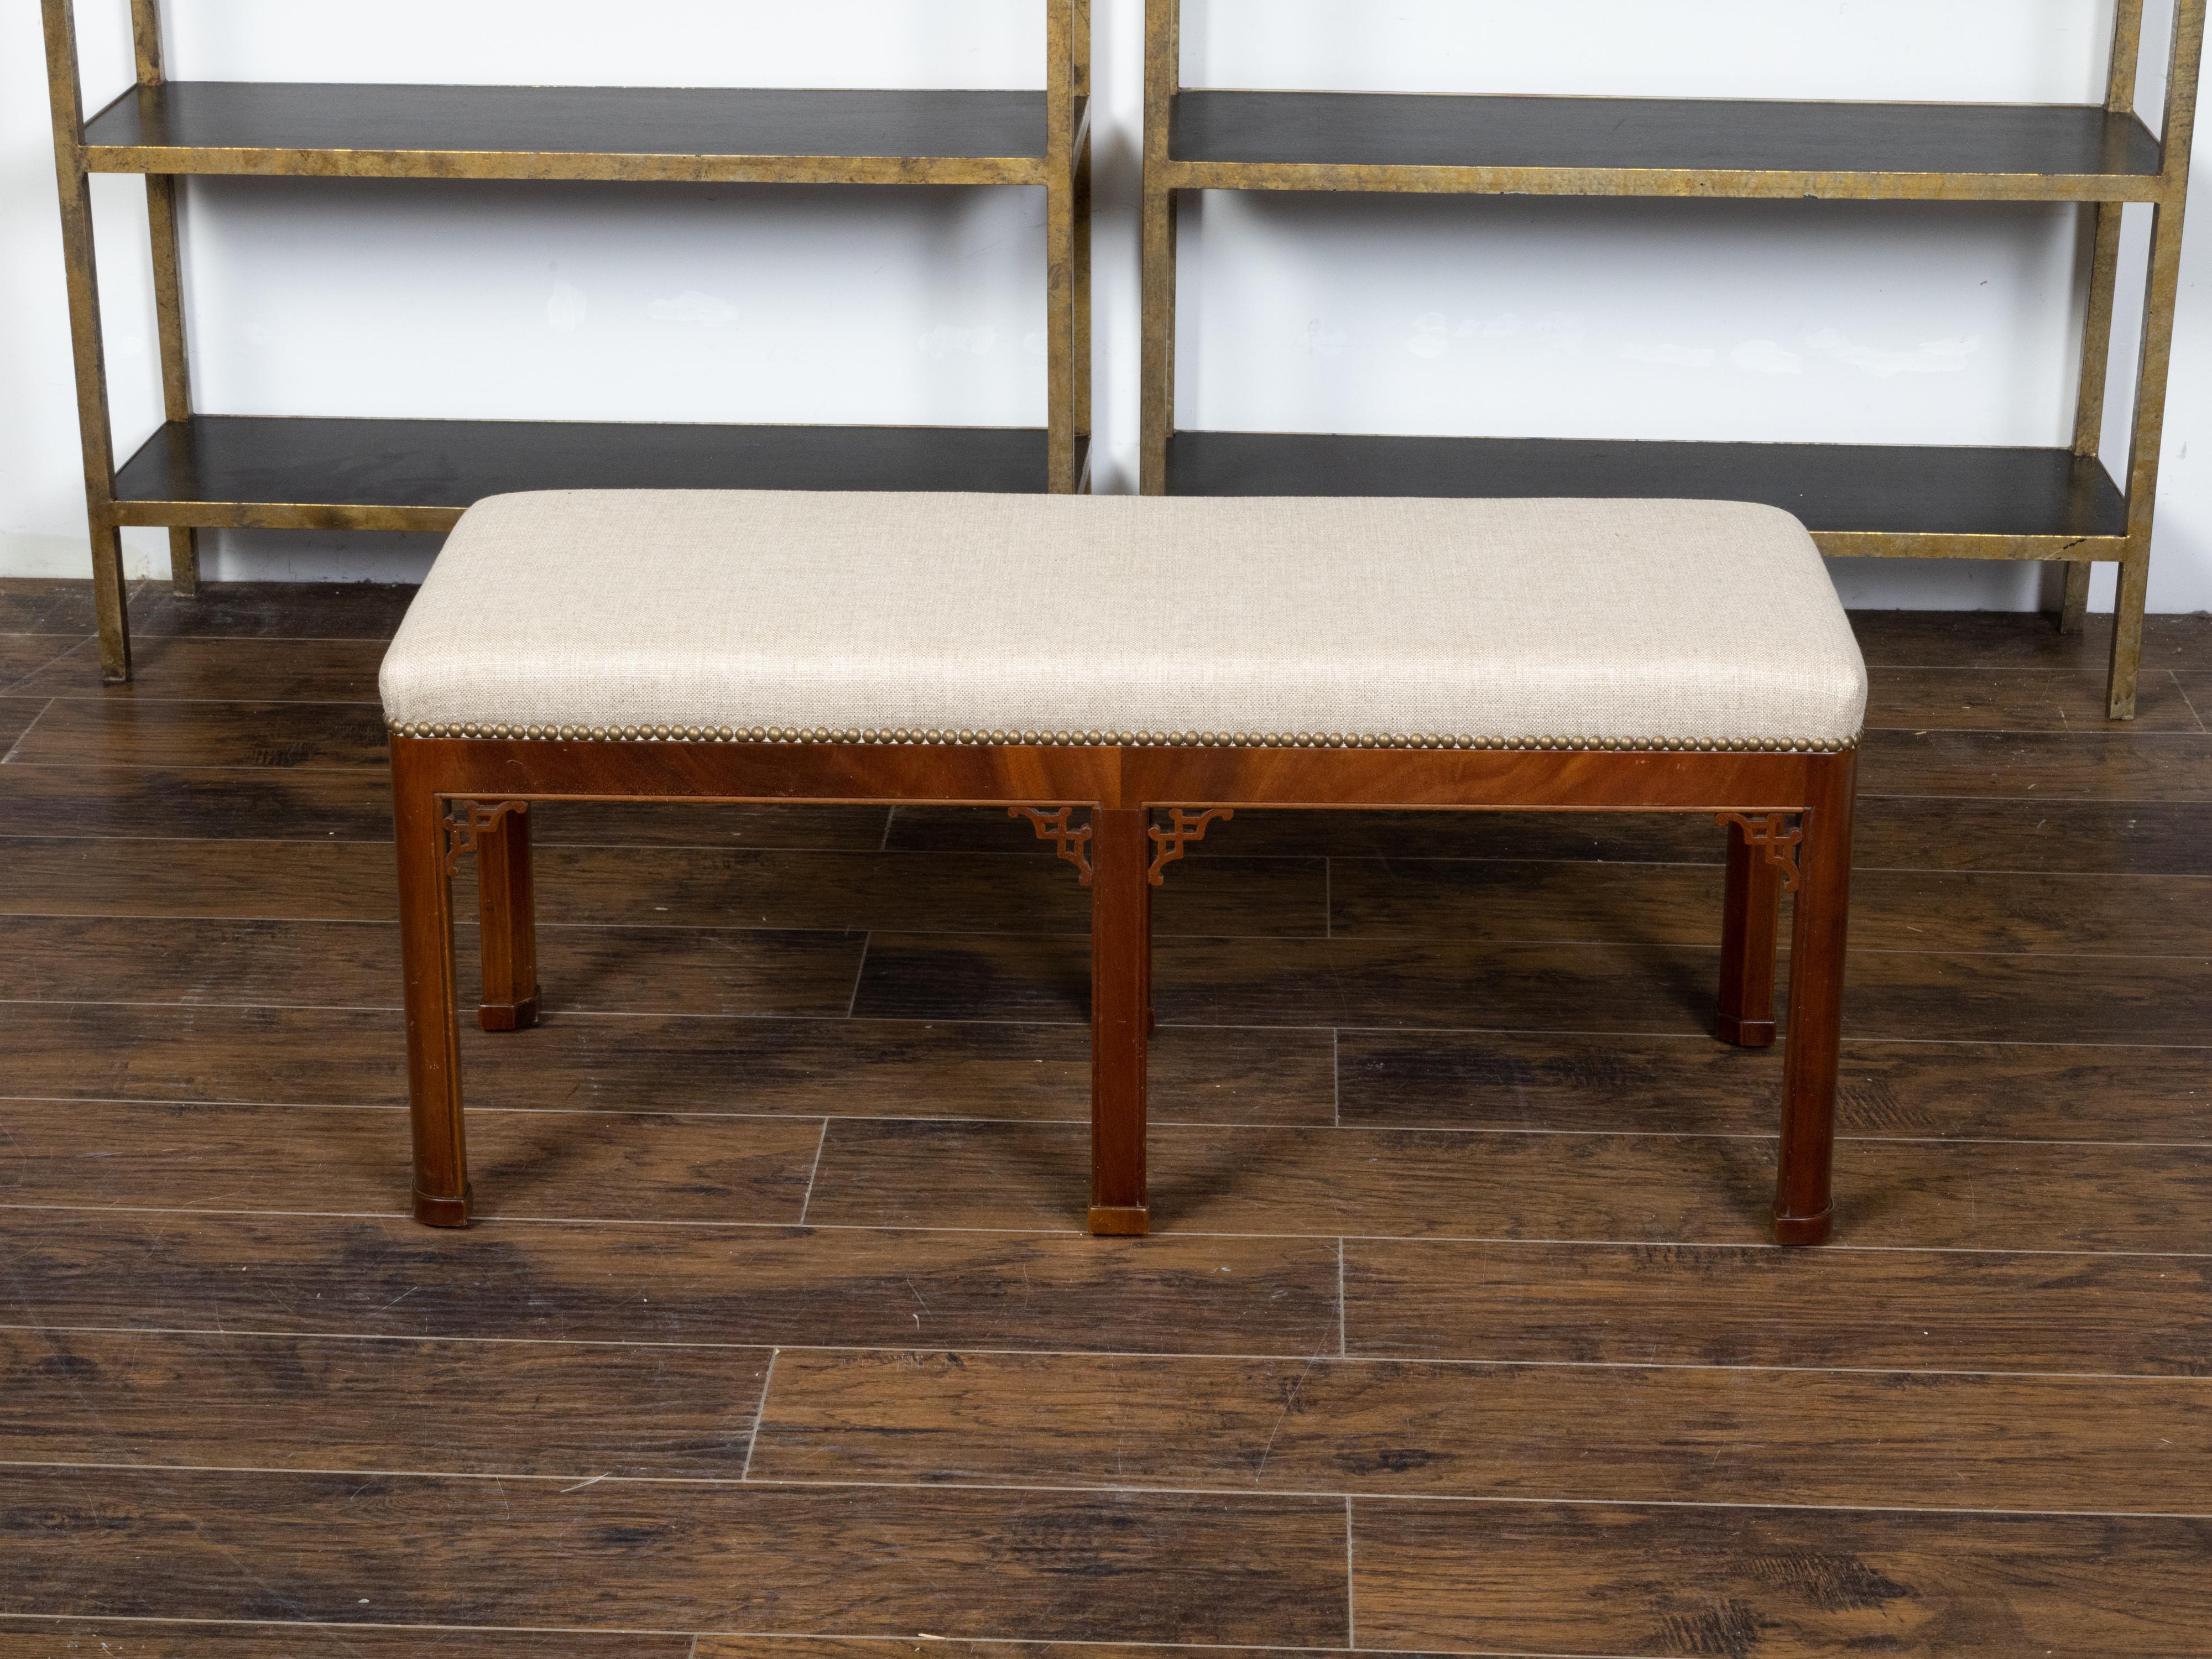 An English mahogany bench from the early 20th century, with fretwork motifs, straight legs and new linen upholstery. Created in England during the first quarter of the 20th century, this mahogany bench features a rectangular seat newly recovered